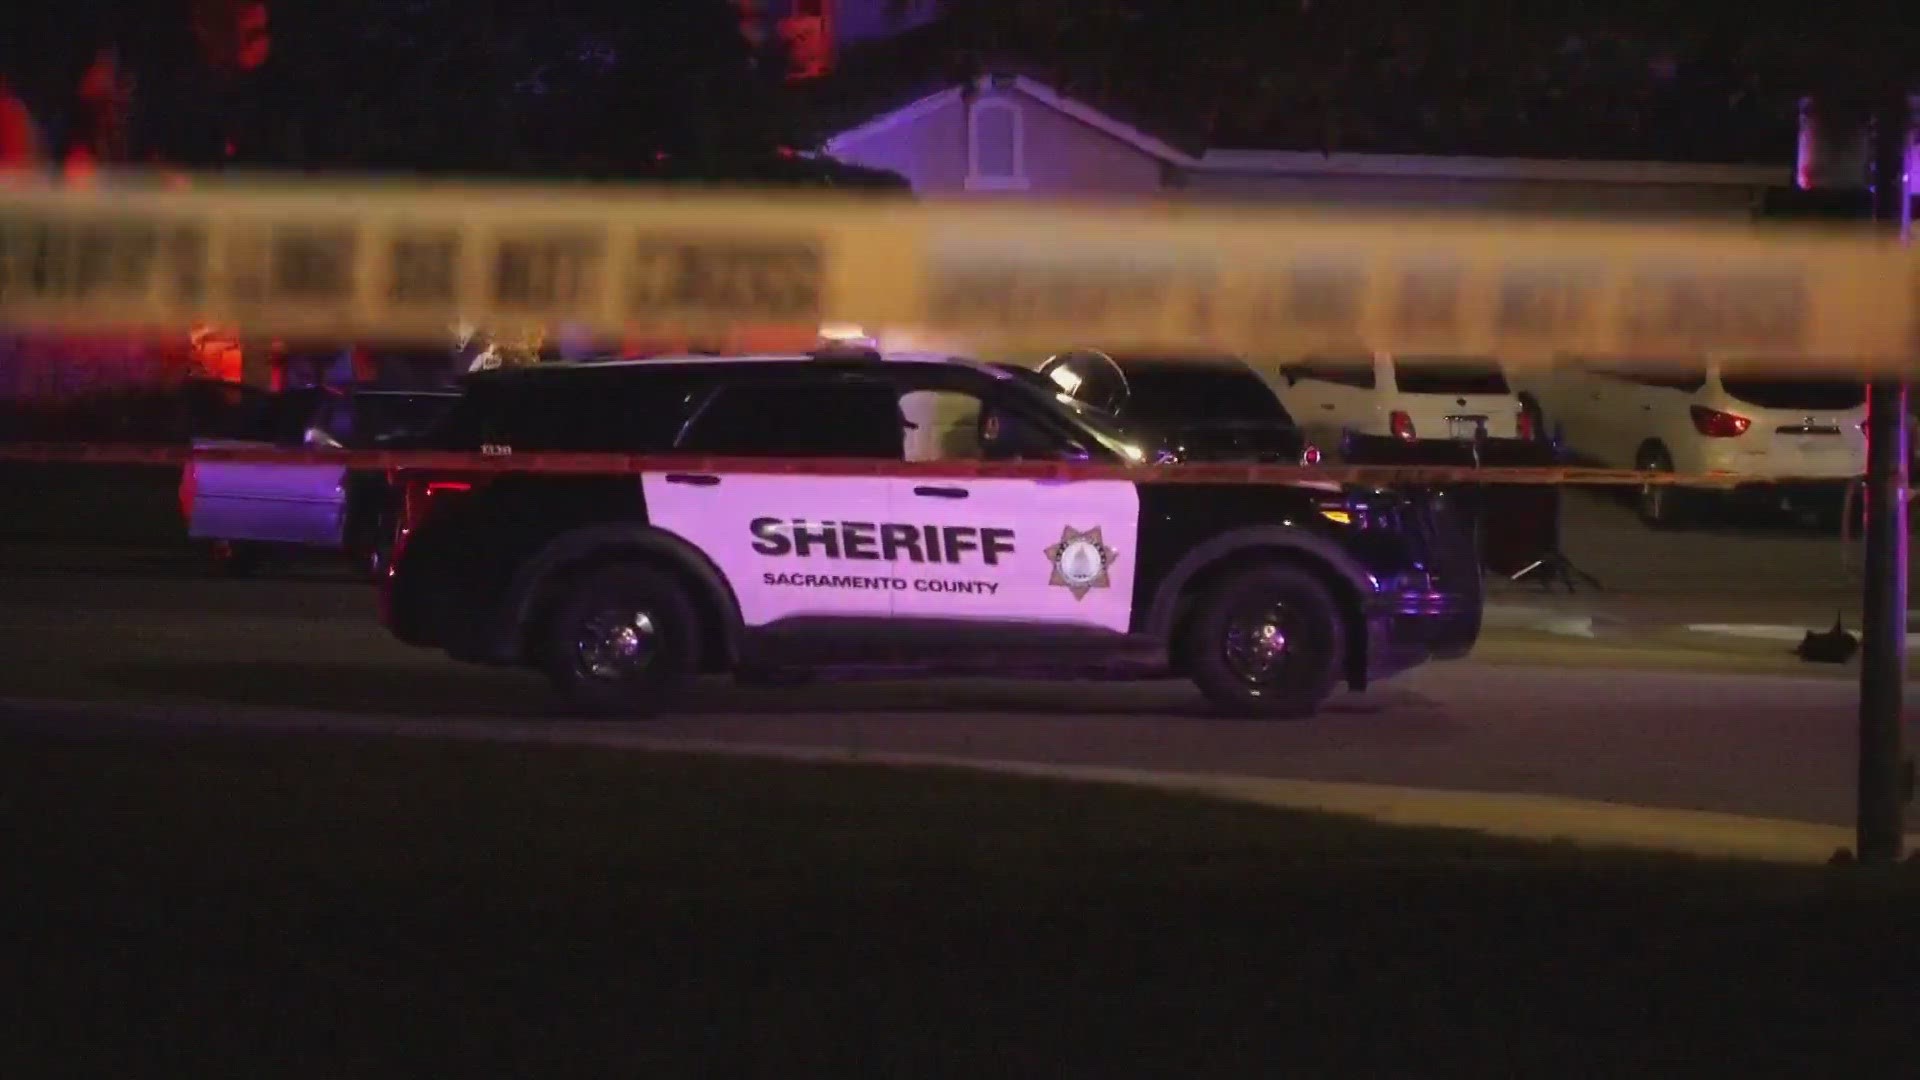 Deputies have launched an investigation after a deadly shooting in Antelope Monday night.